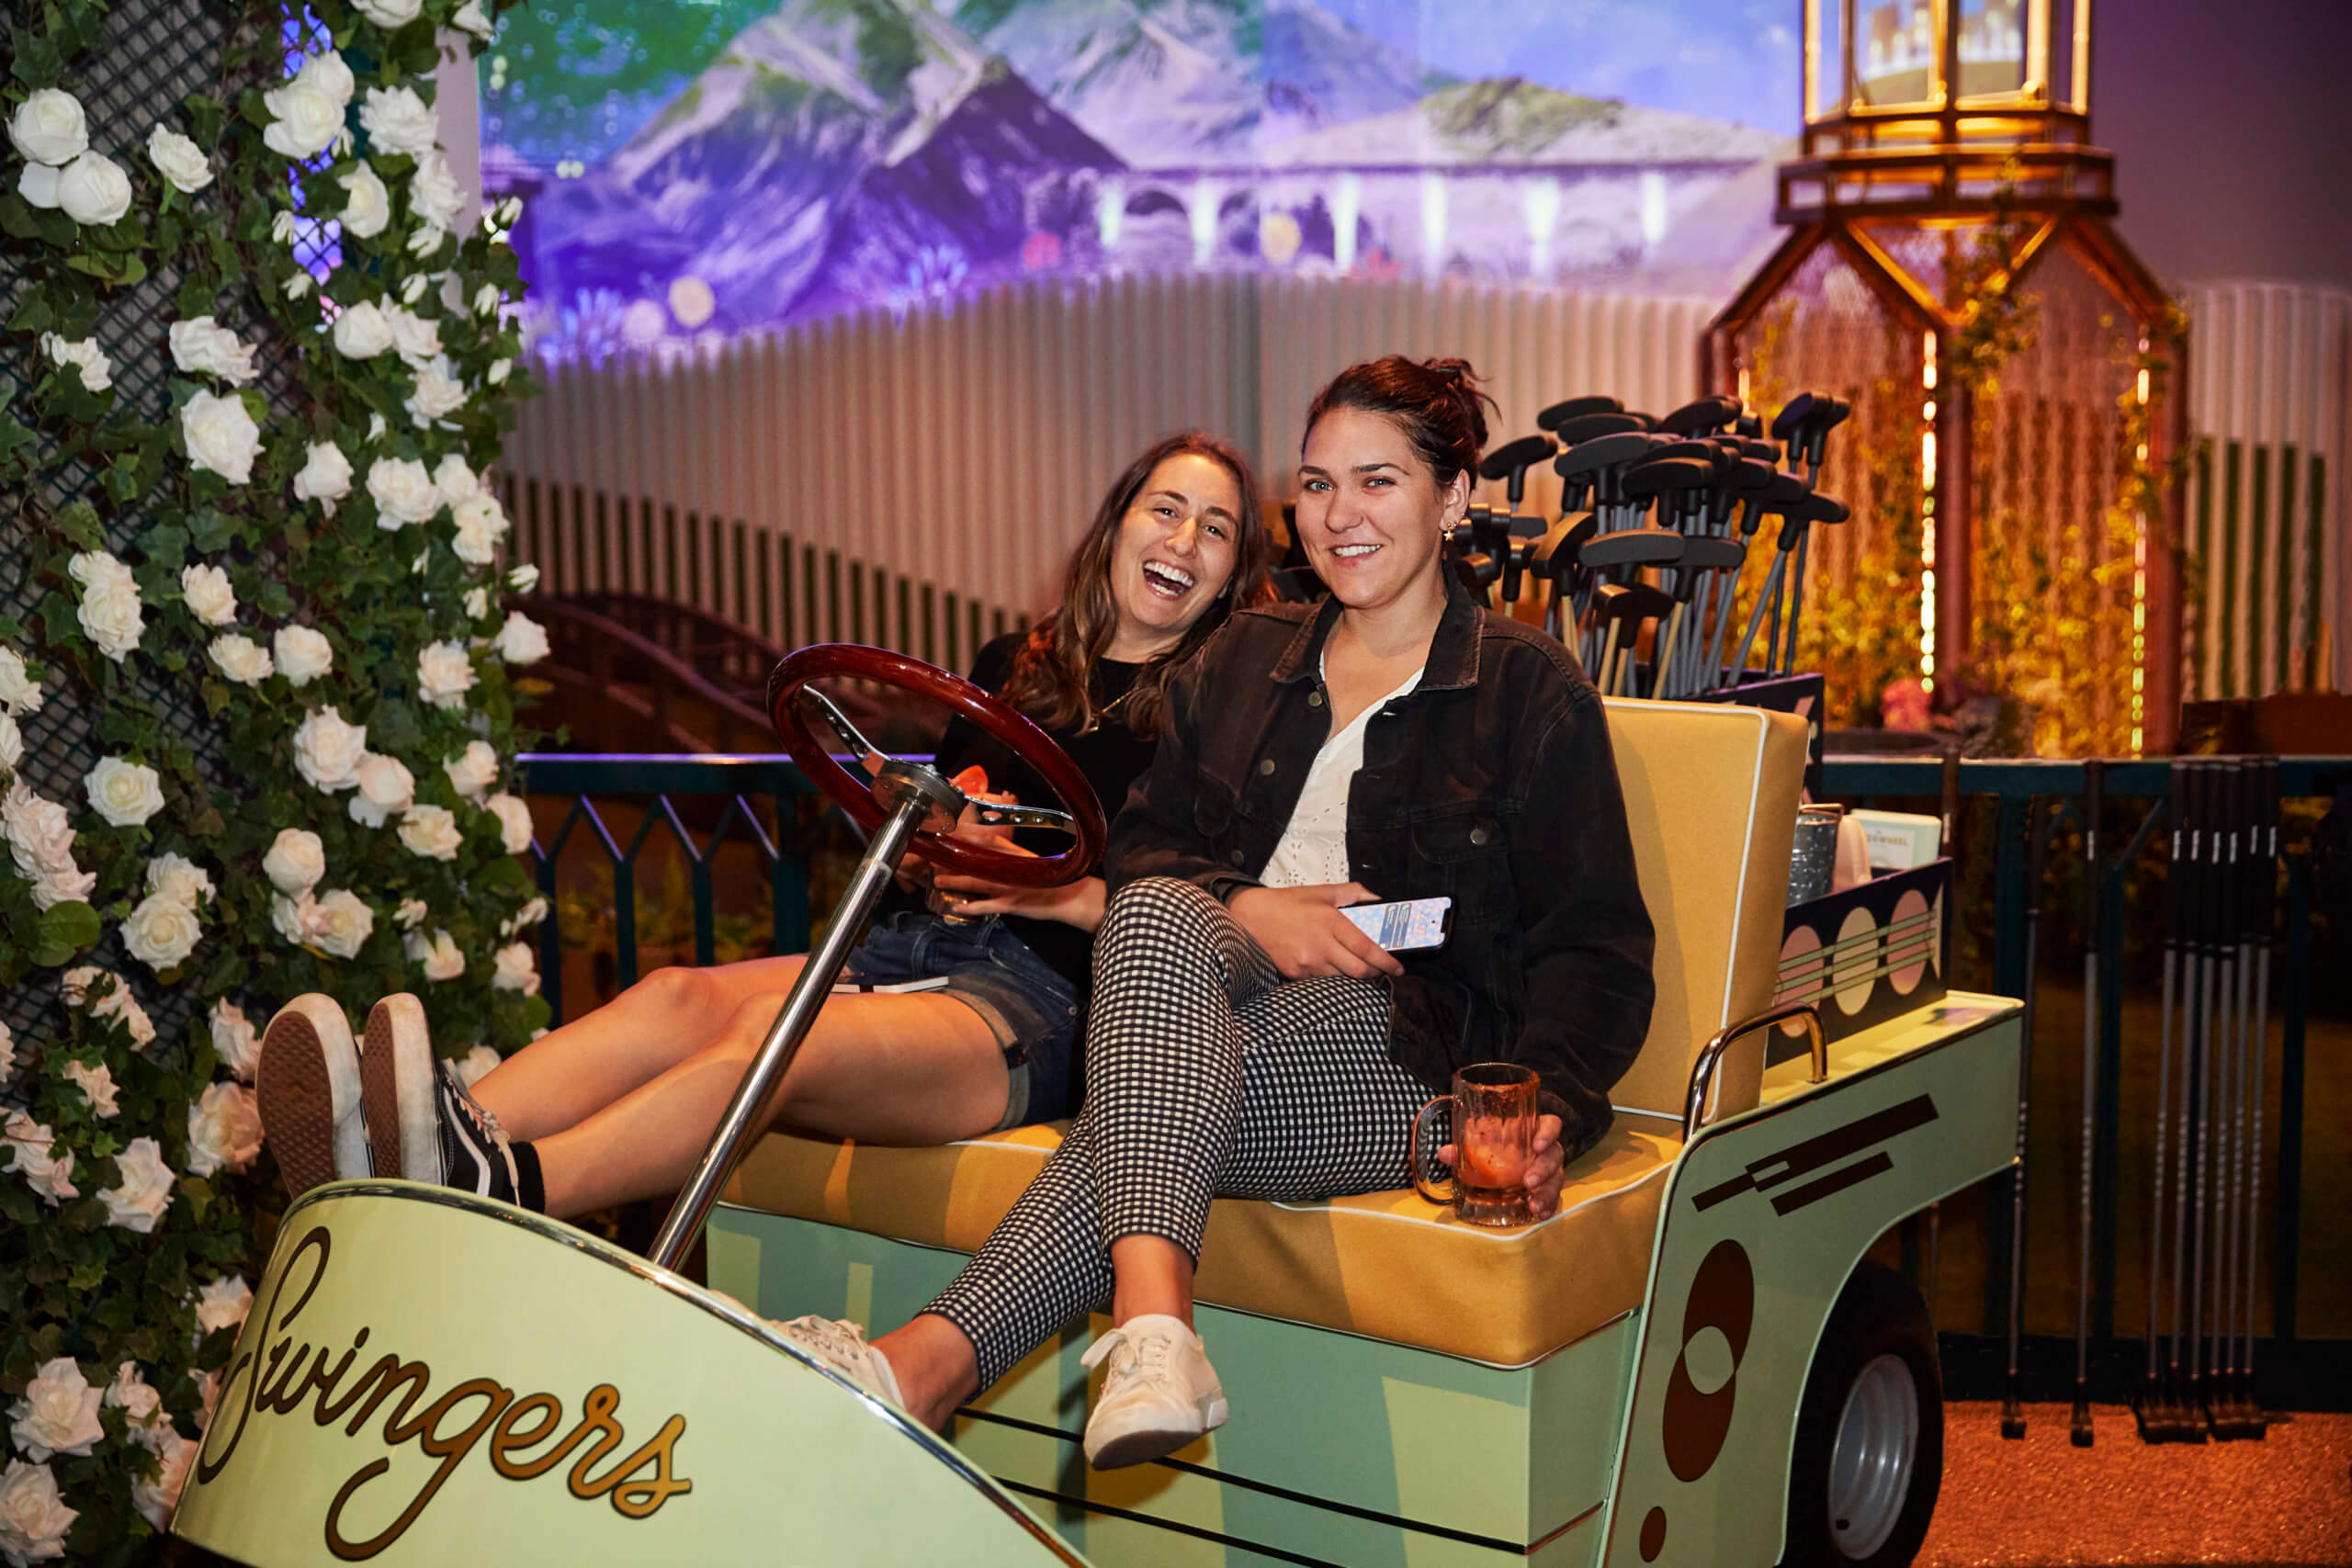 Swingers brings immersive mini golf experience to New York City with local fare and drinks amNewYork pic